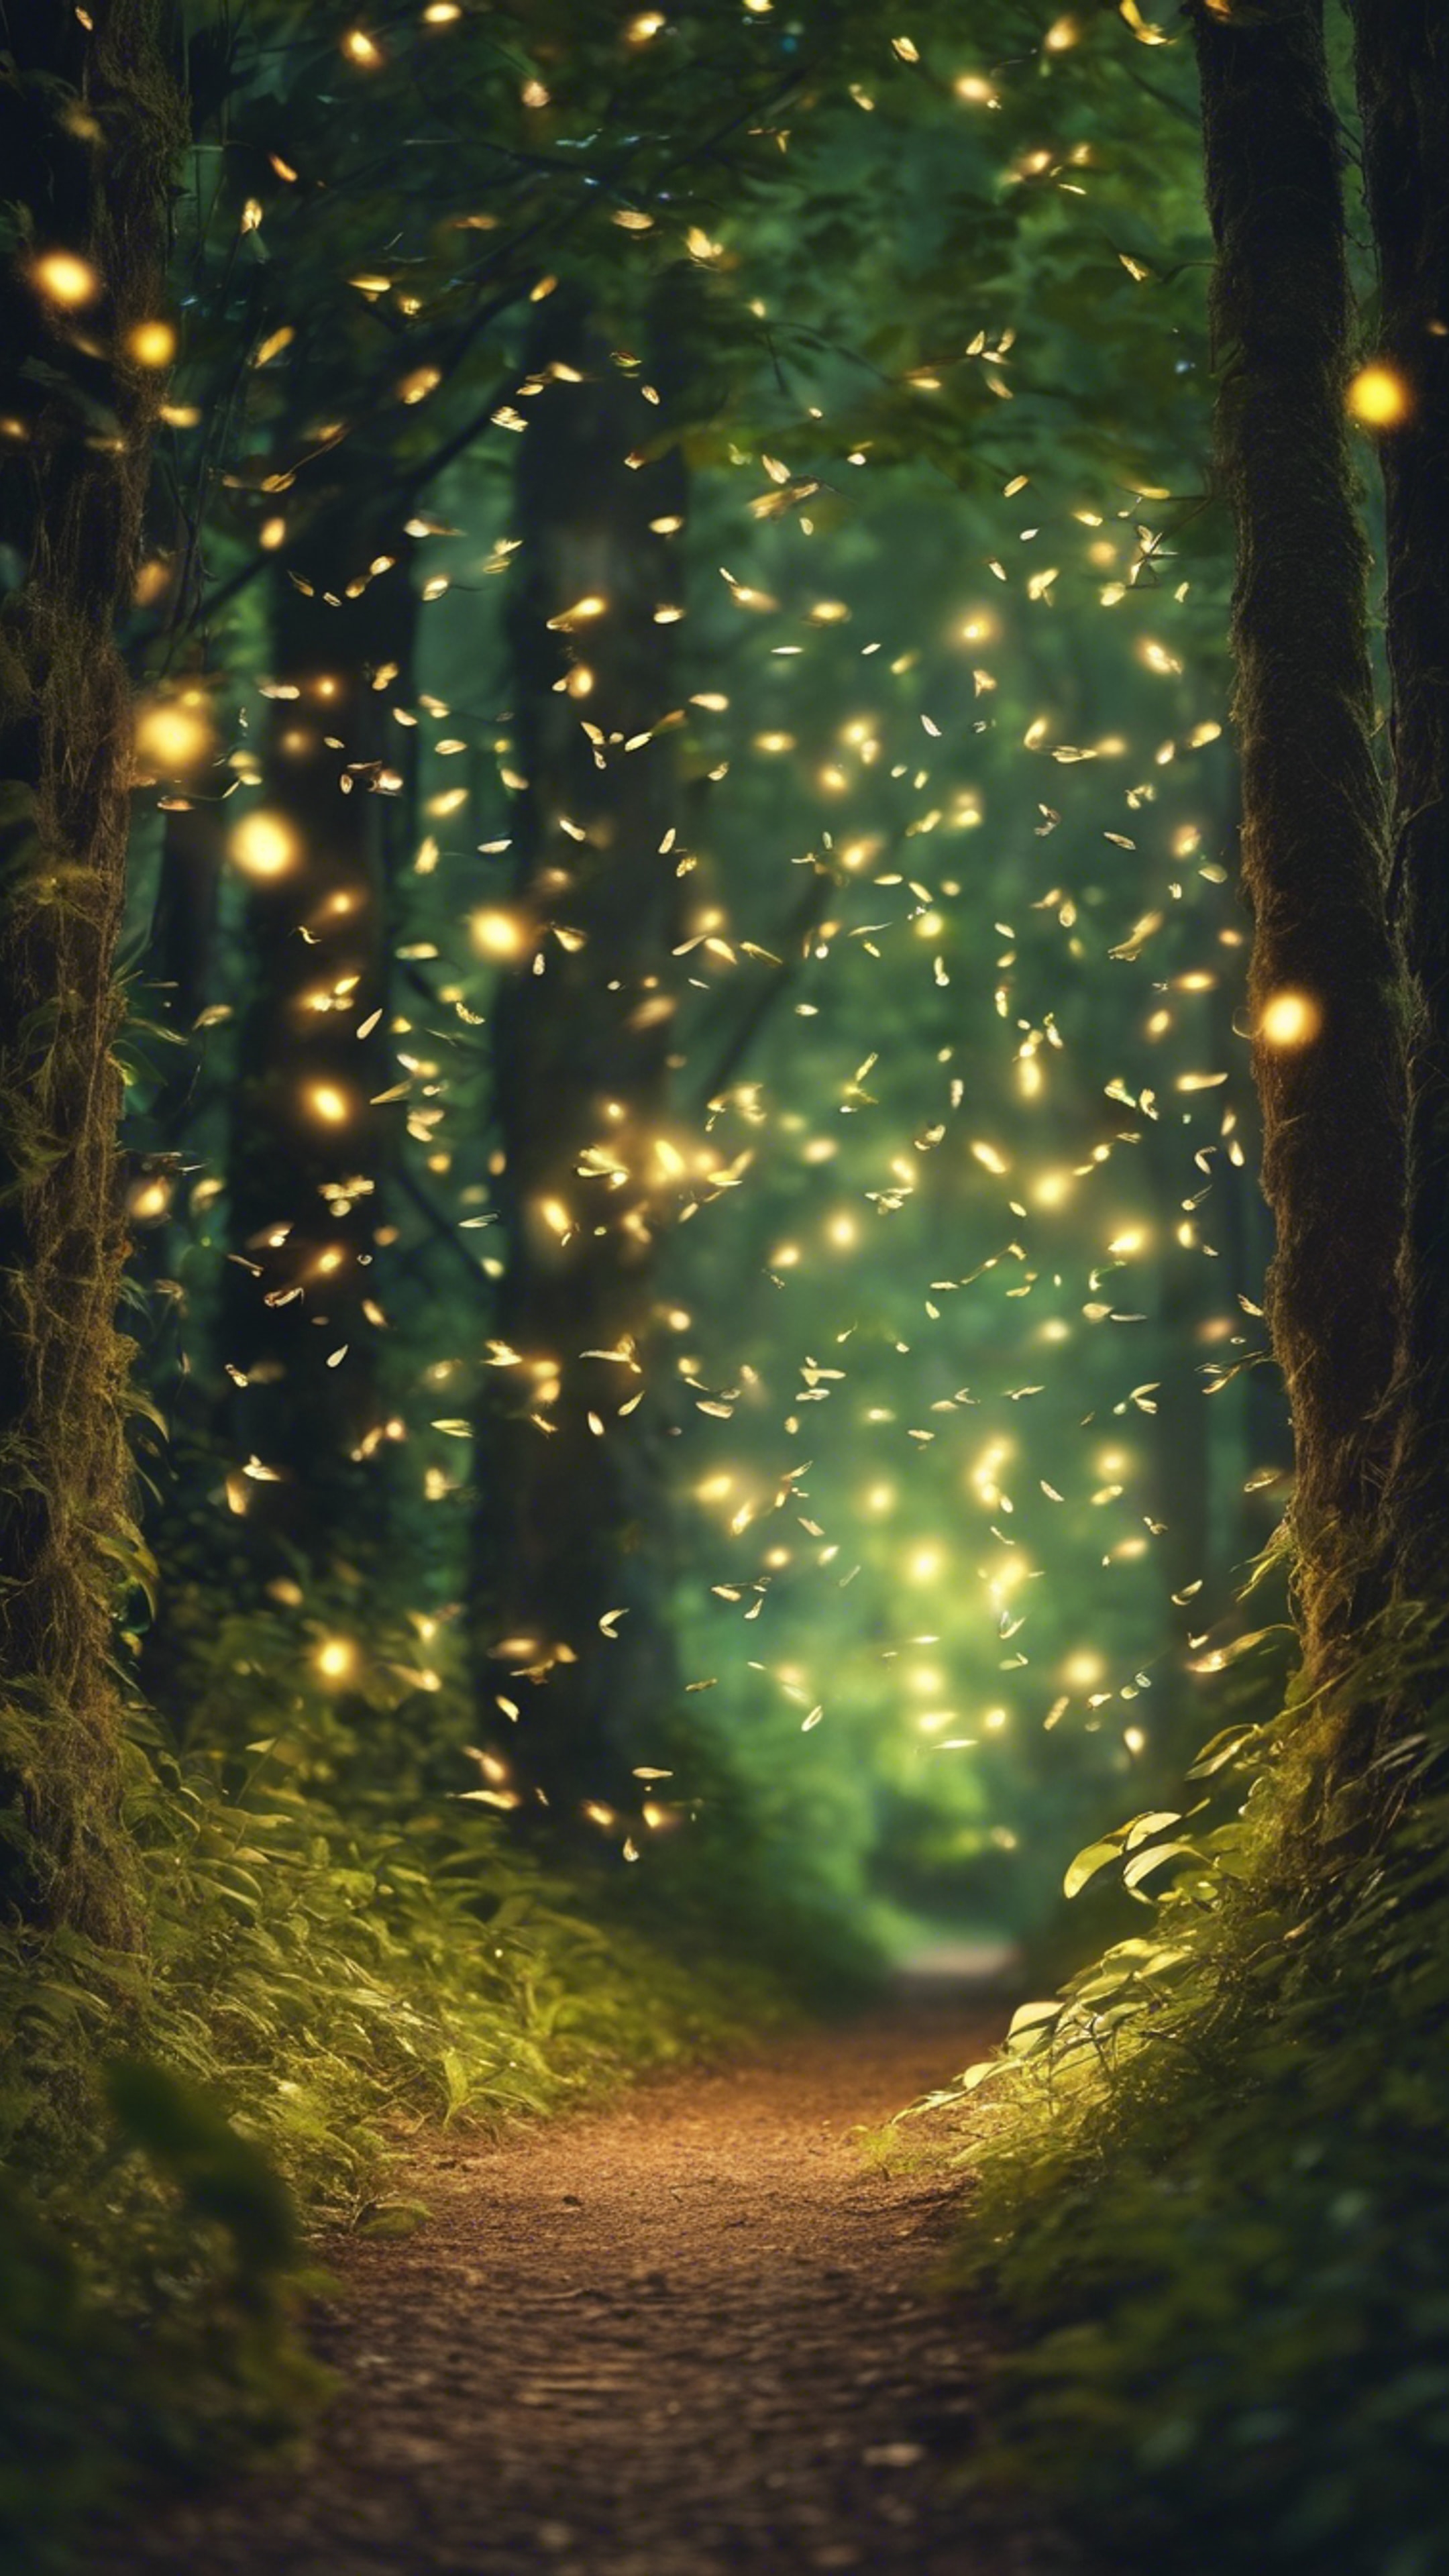 An enchanting forest path illuminated by the mystical glow of fireflies and the soft, natural light filtering through the overhead canopy of leaves.壁紙[4b115bf911ac49cd855d]